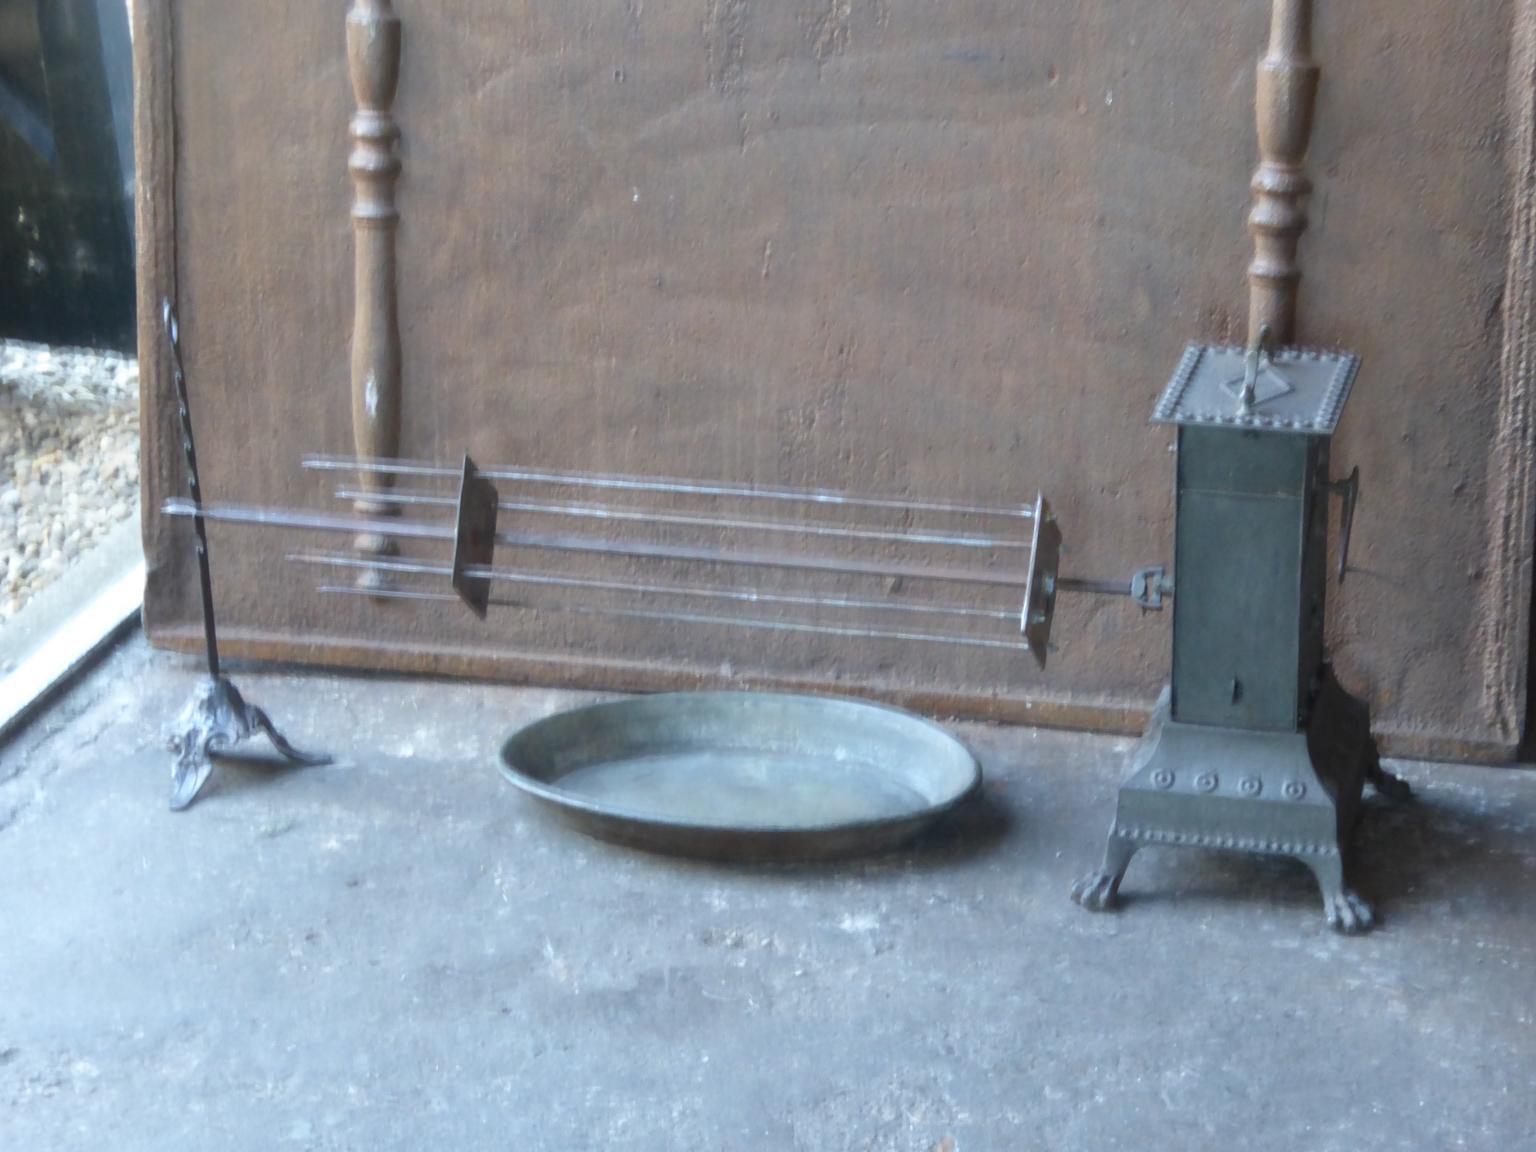 19th century French Napoleon III roasting jack and attachments made of wrought iron and brass. The roasting jack can be used for cooking in the fireplace. It is fully functional. It is a complete set.

 



 

